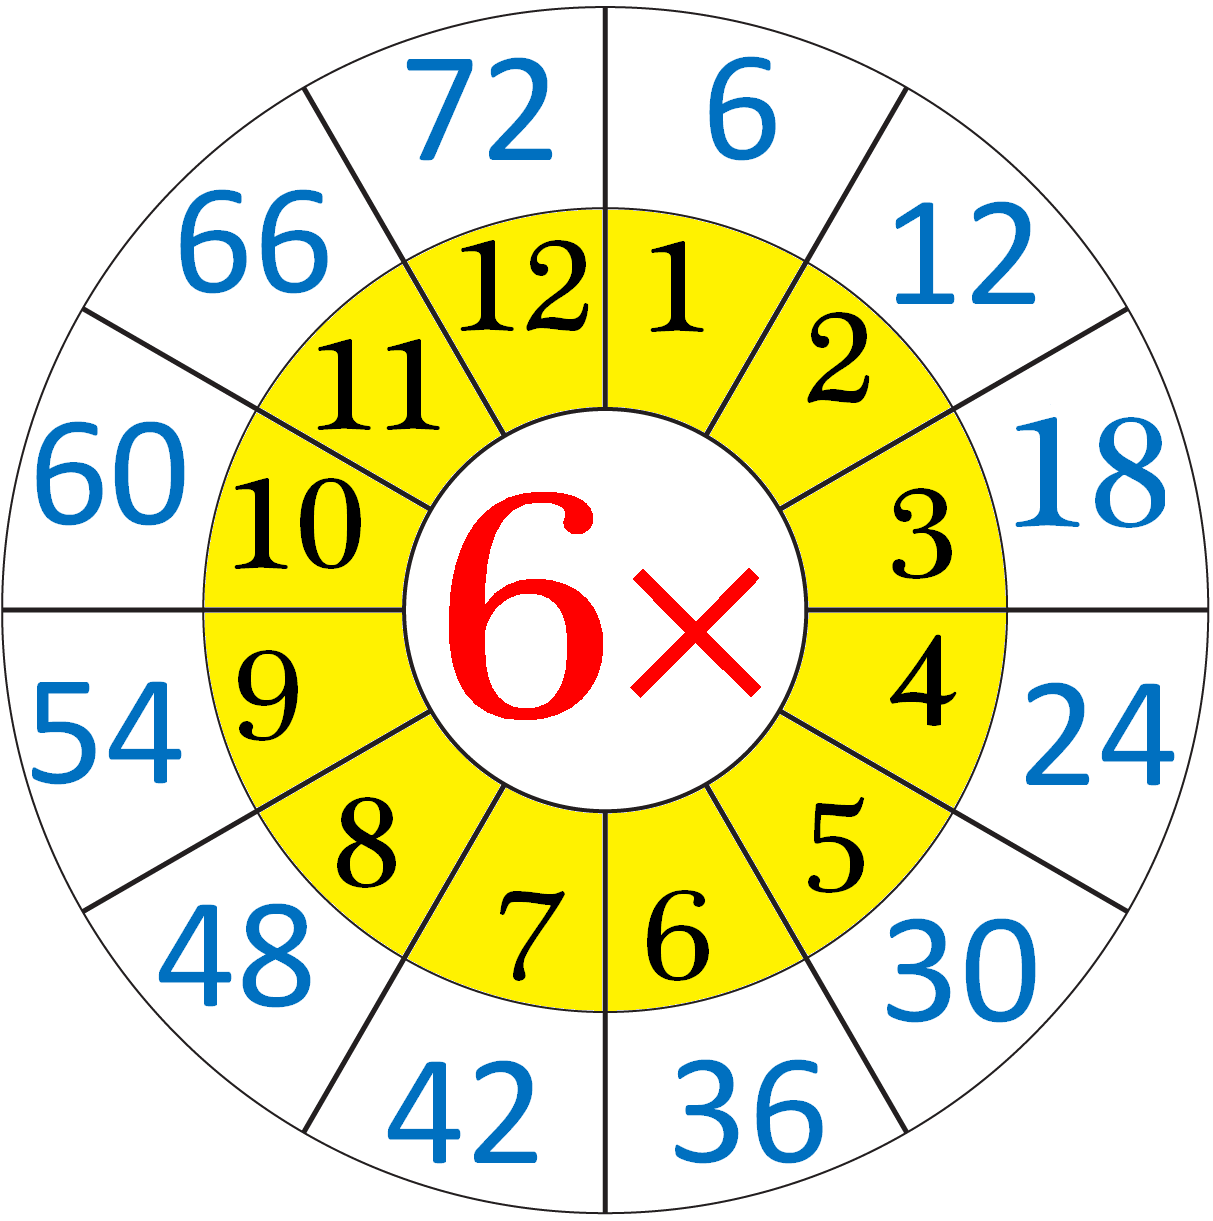 multiplication-table-of-6-read-and-write-the-table-of-6-six-times-table